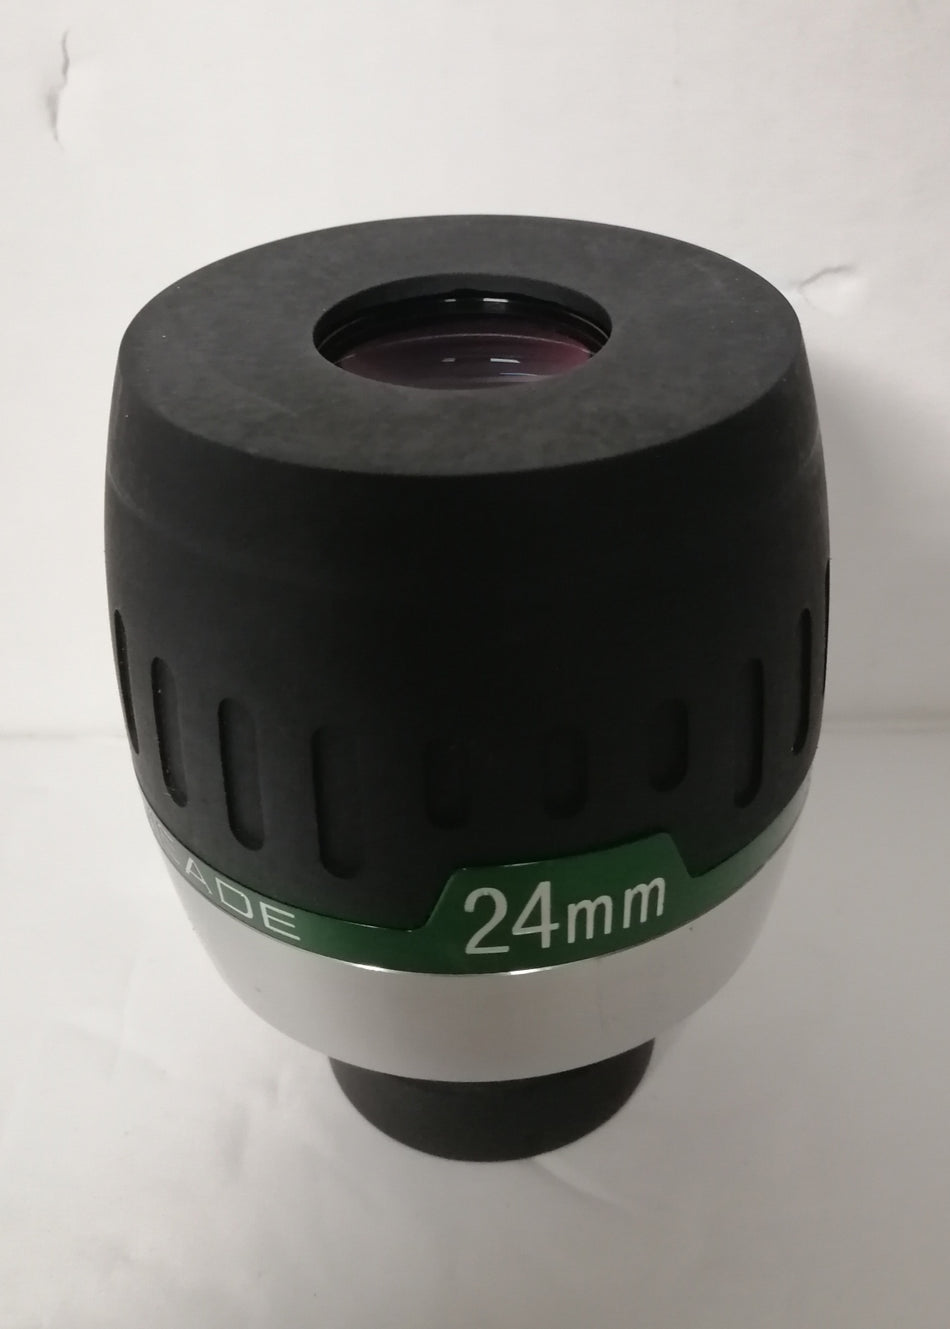 Meade 24mm Super Wide Angle Eyepiece -1.25" (Preowned)